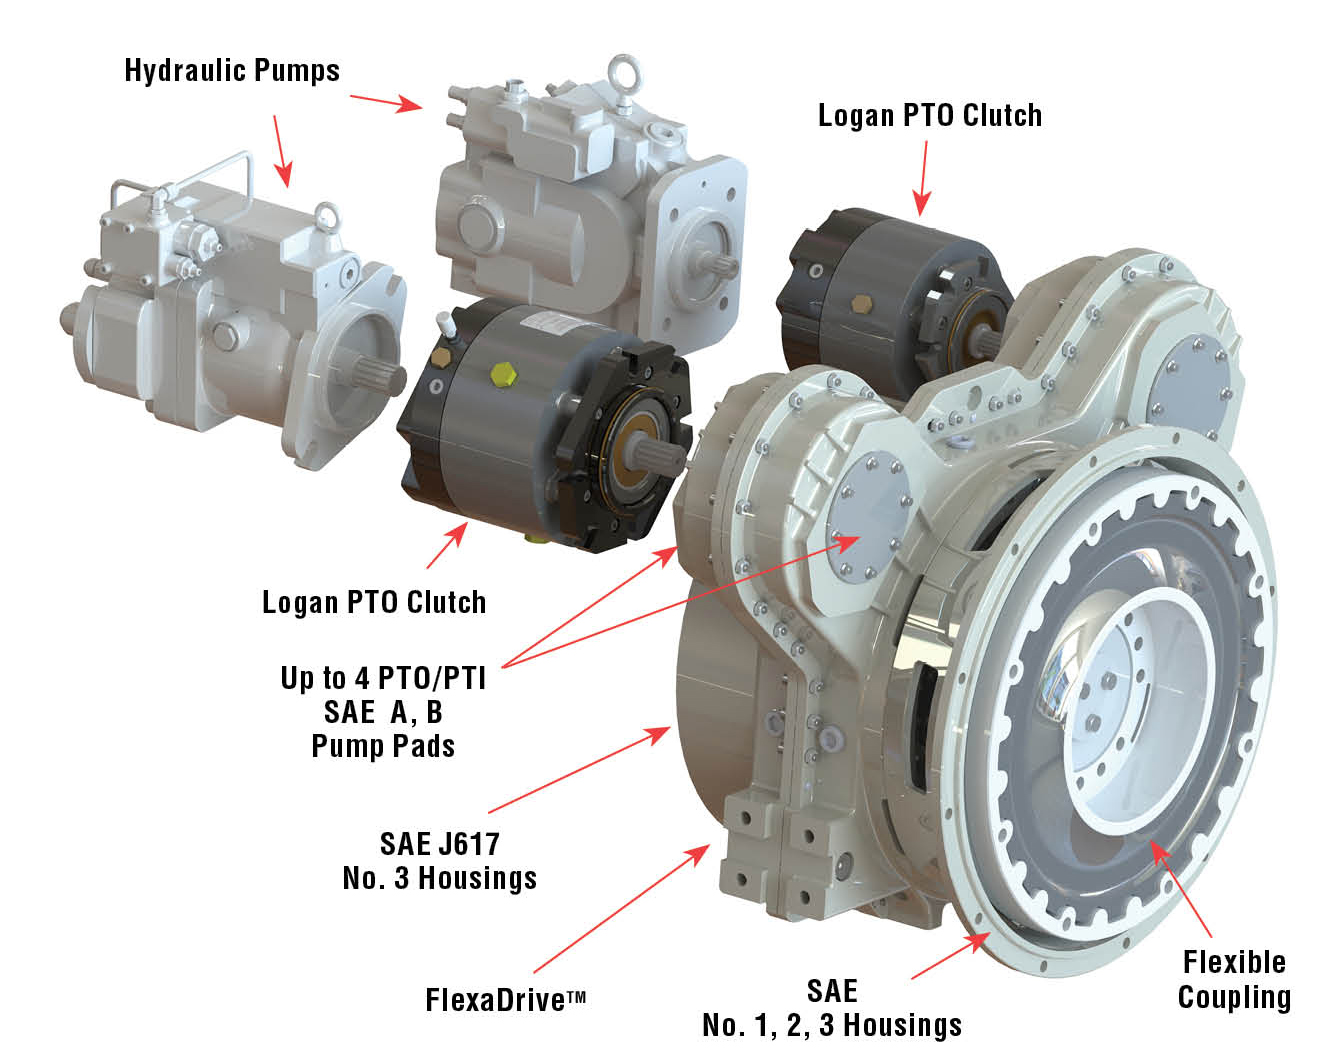 Logan Direct Drive Power Take-off (PTO) Clutches